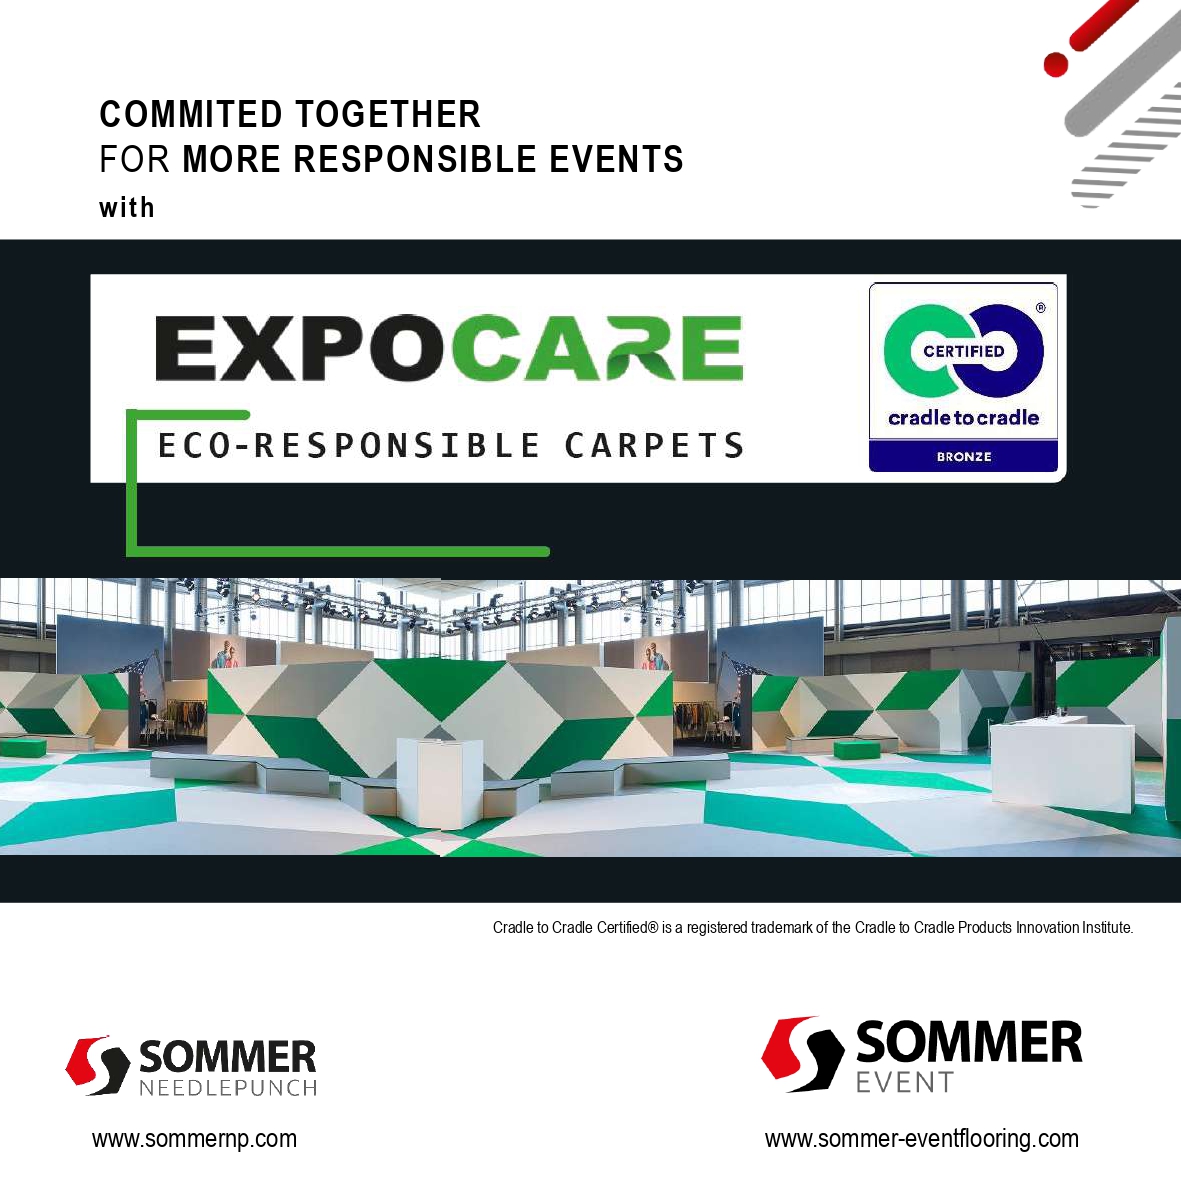 Sommer_EXPOCARE_Eco-responsible carpets C2C certified-2023